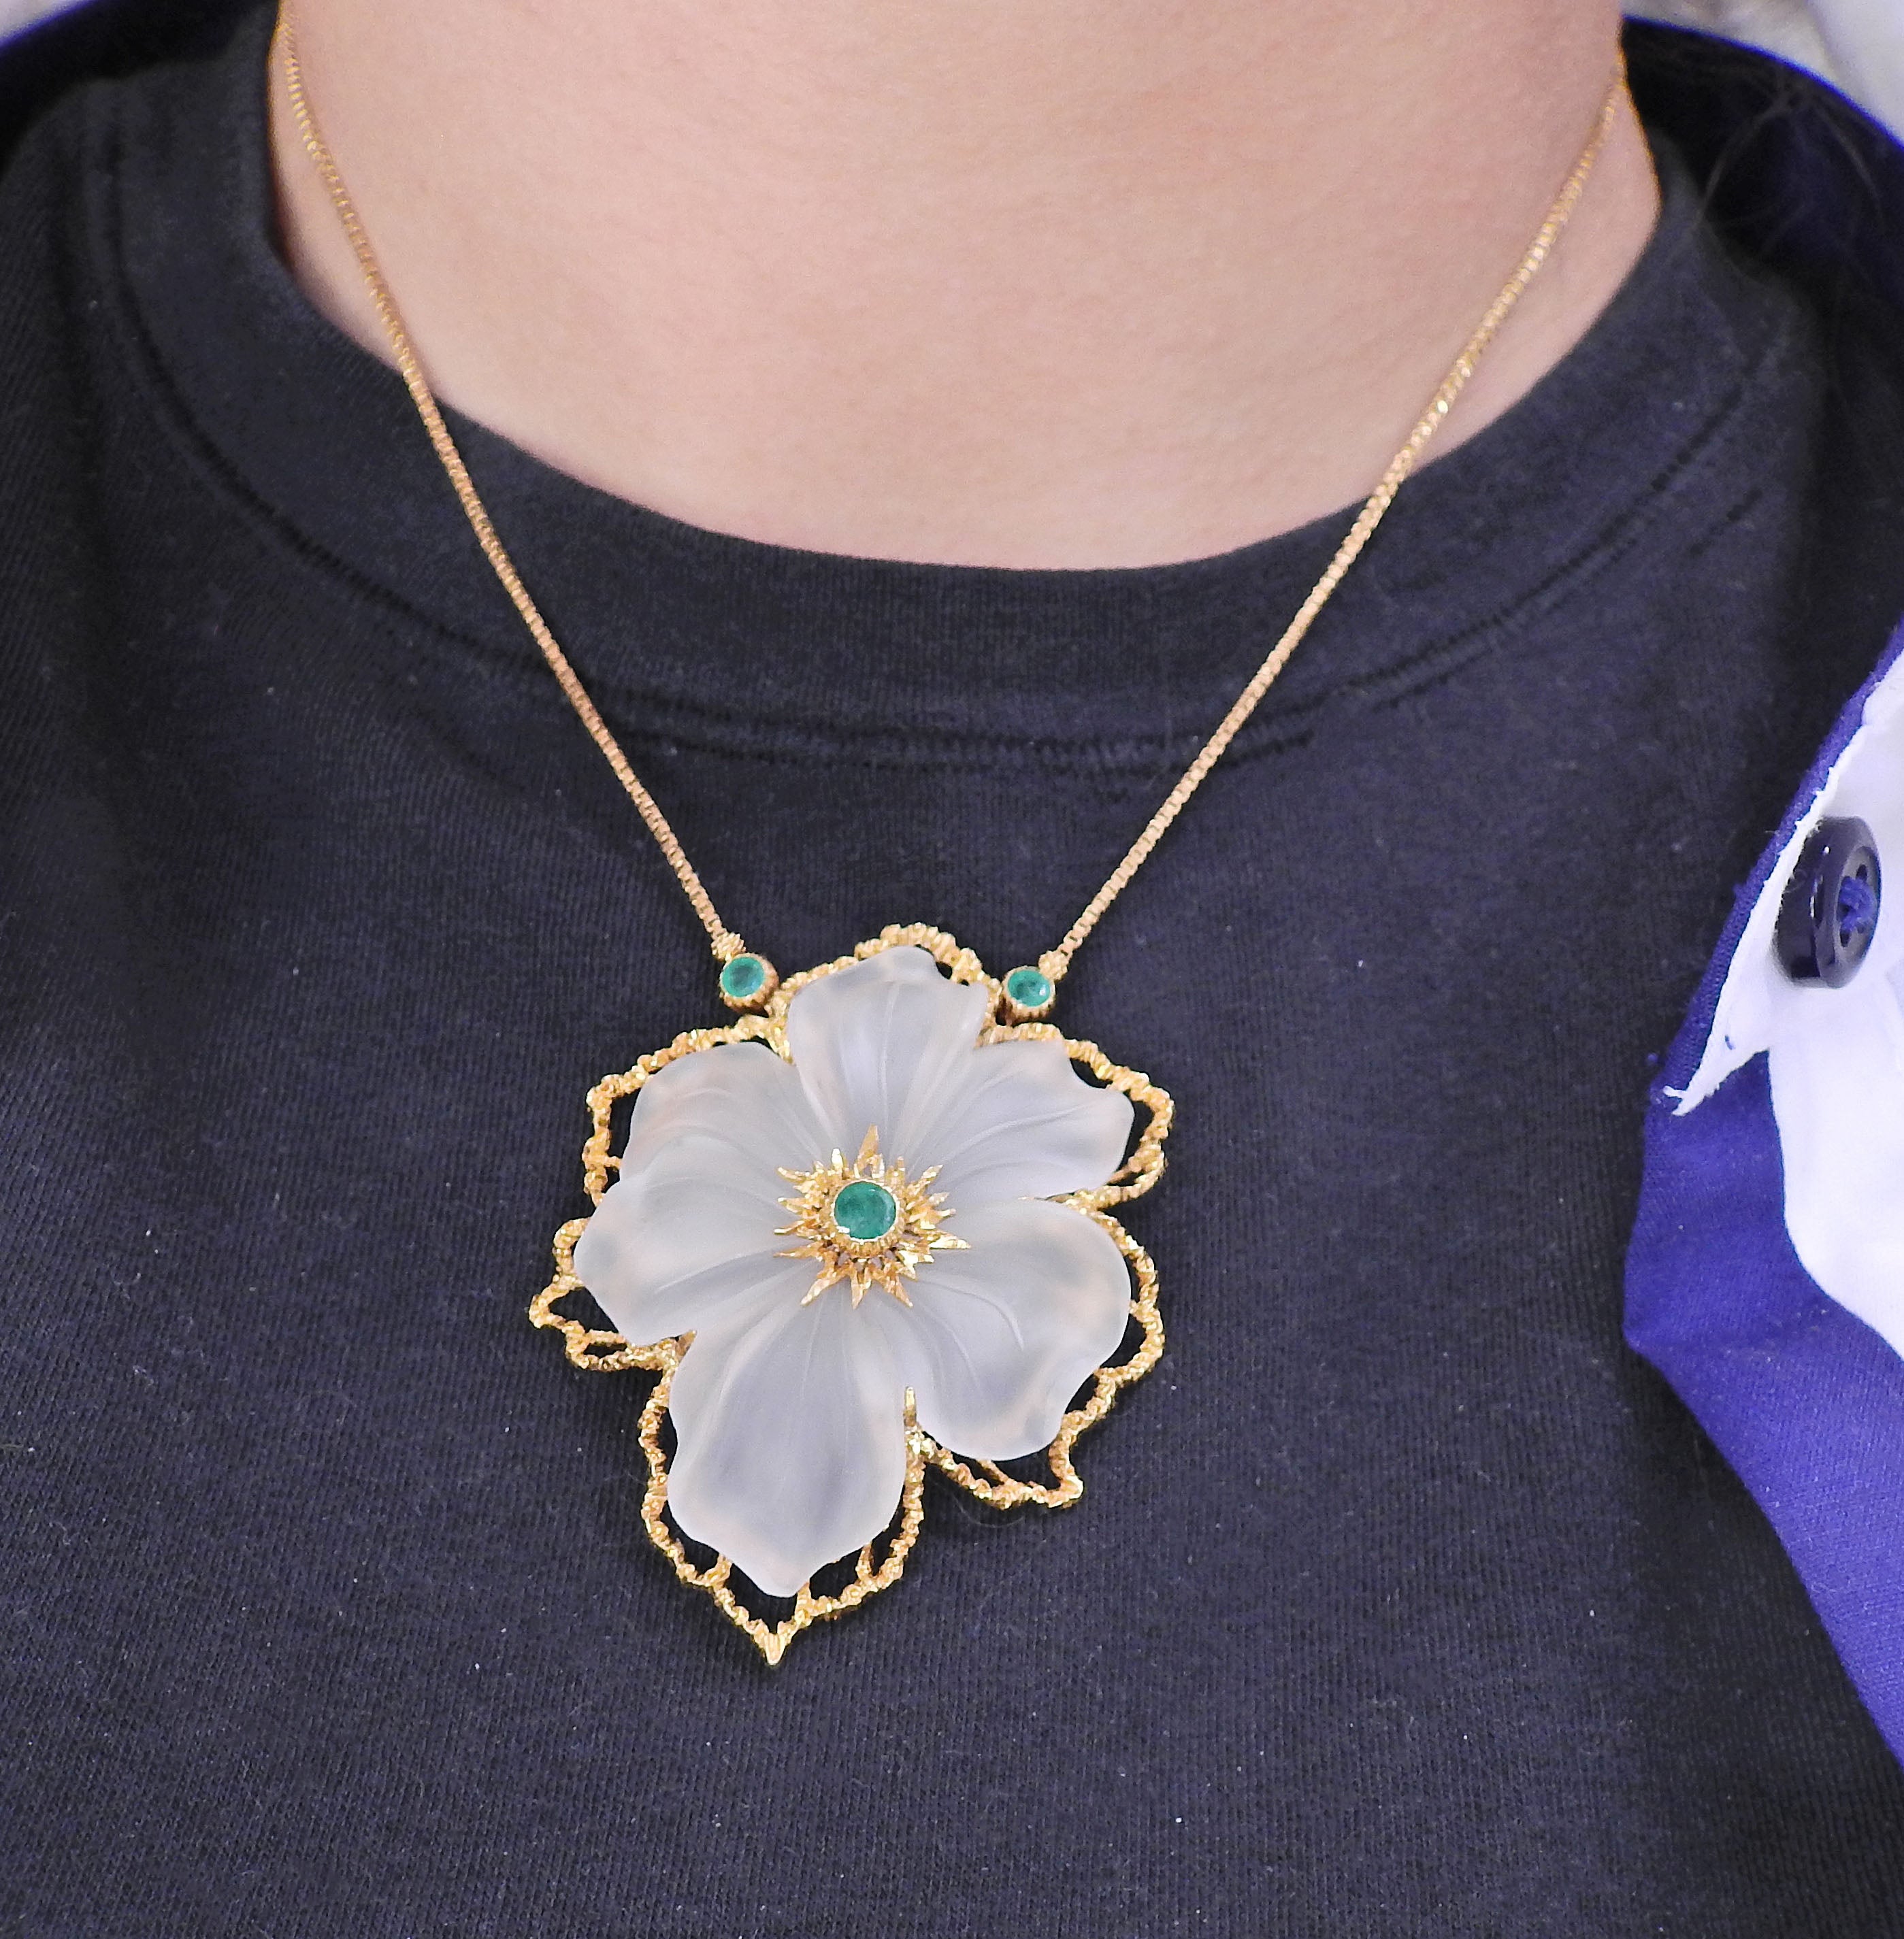 Buccellati Frosted Crystal Emerald Flower Brooch Pendant Necklace